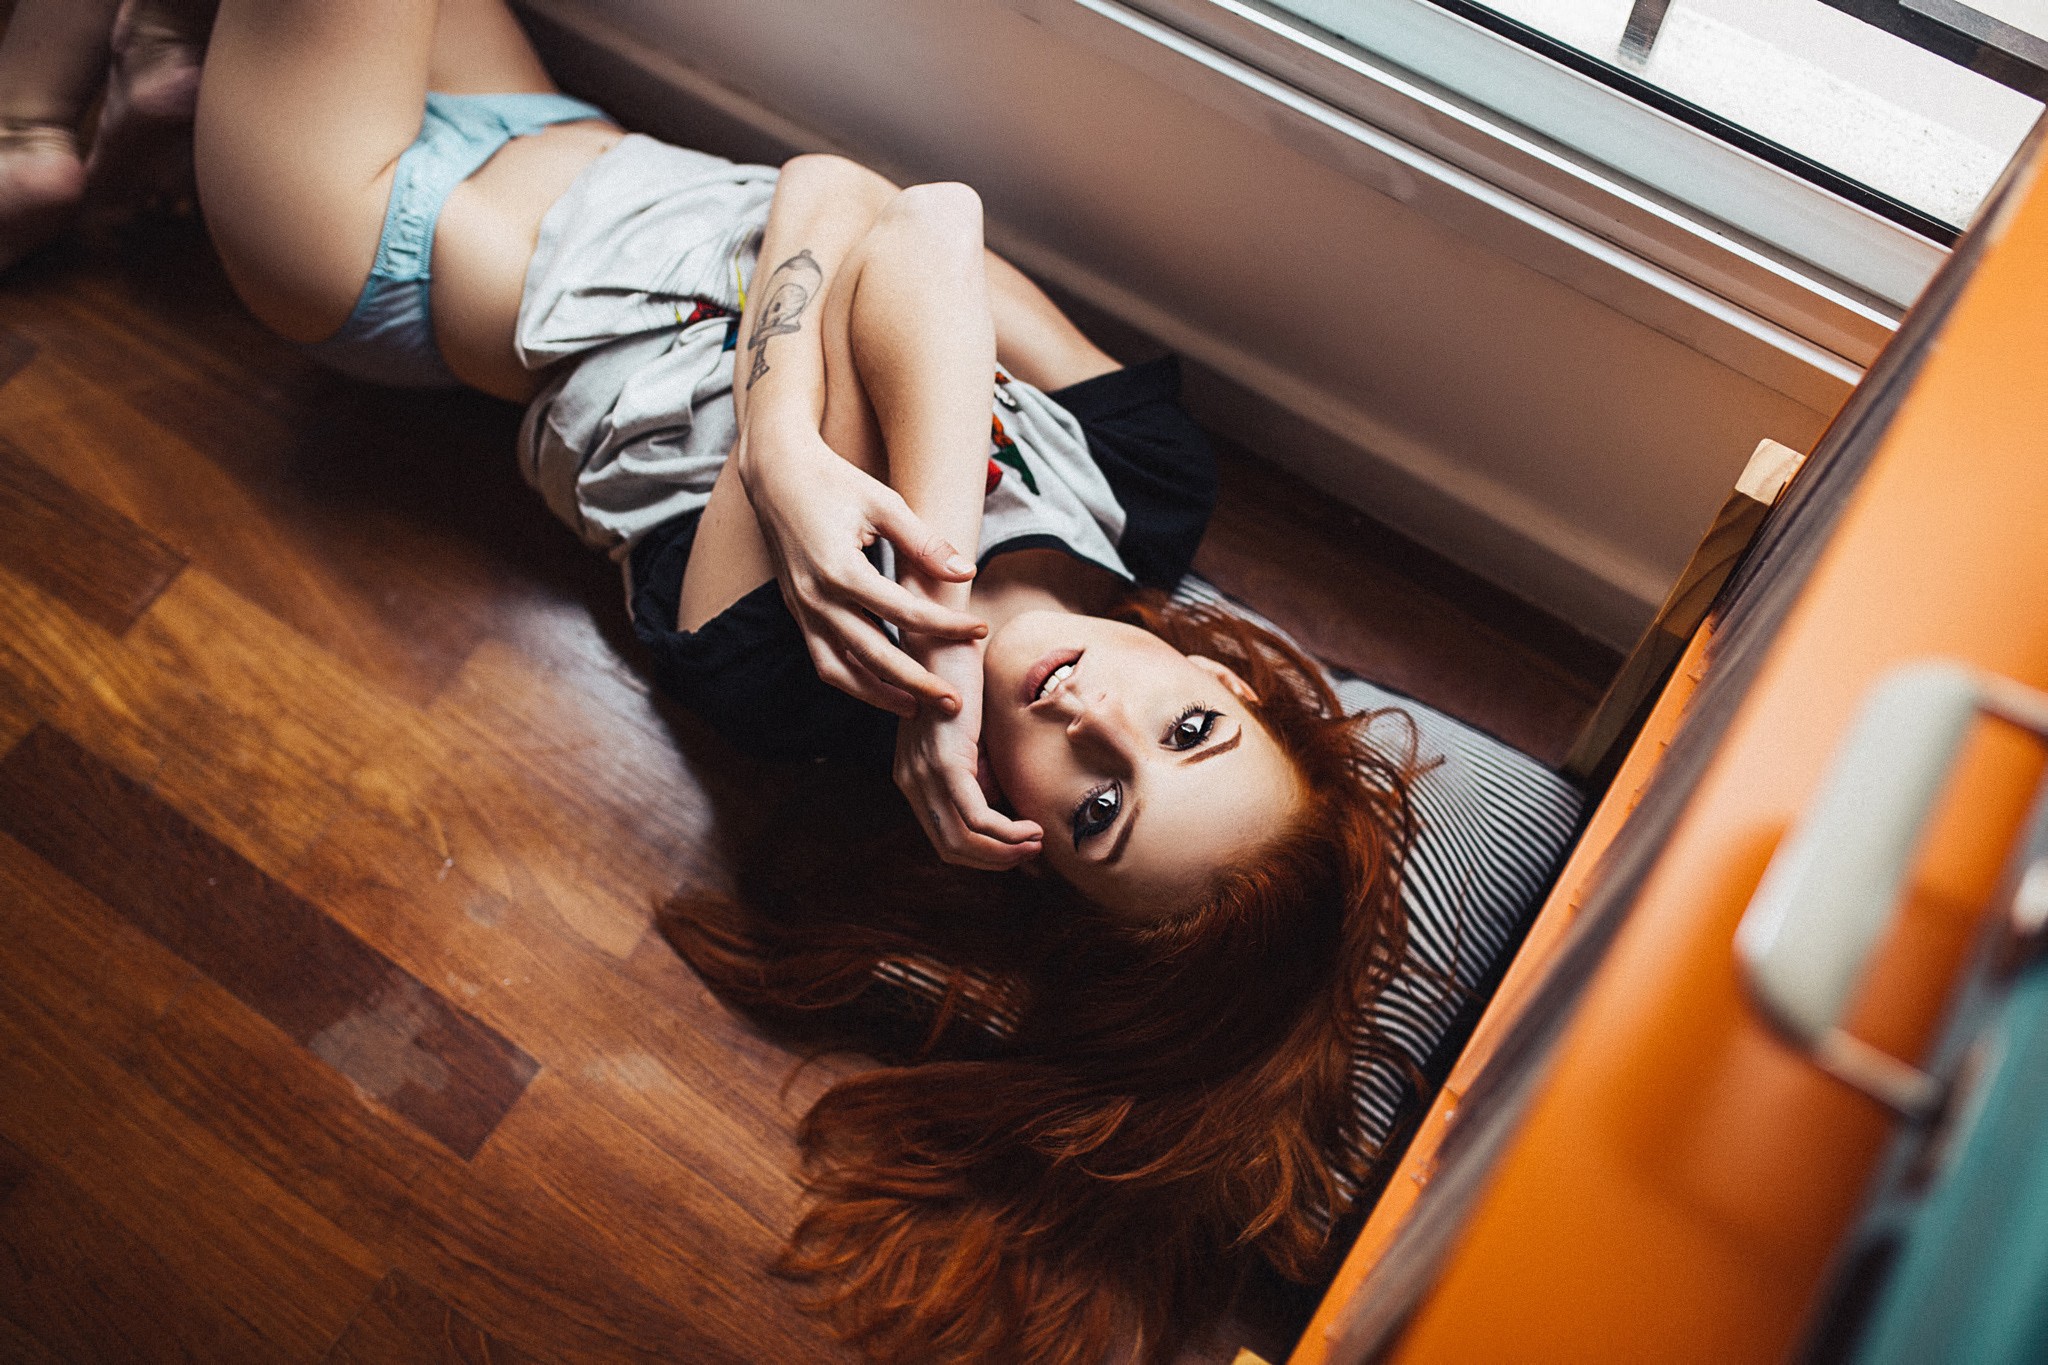 People 2048x1365 Elisa Rios women redhead lingerie thong wooden surface on the floor looking at viewer brunette tattoo Henrique Cesar T-shirt hair spread out